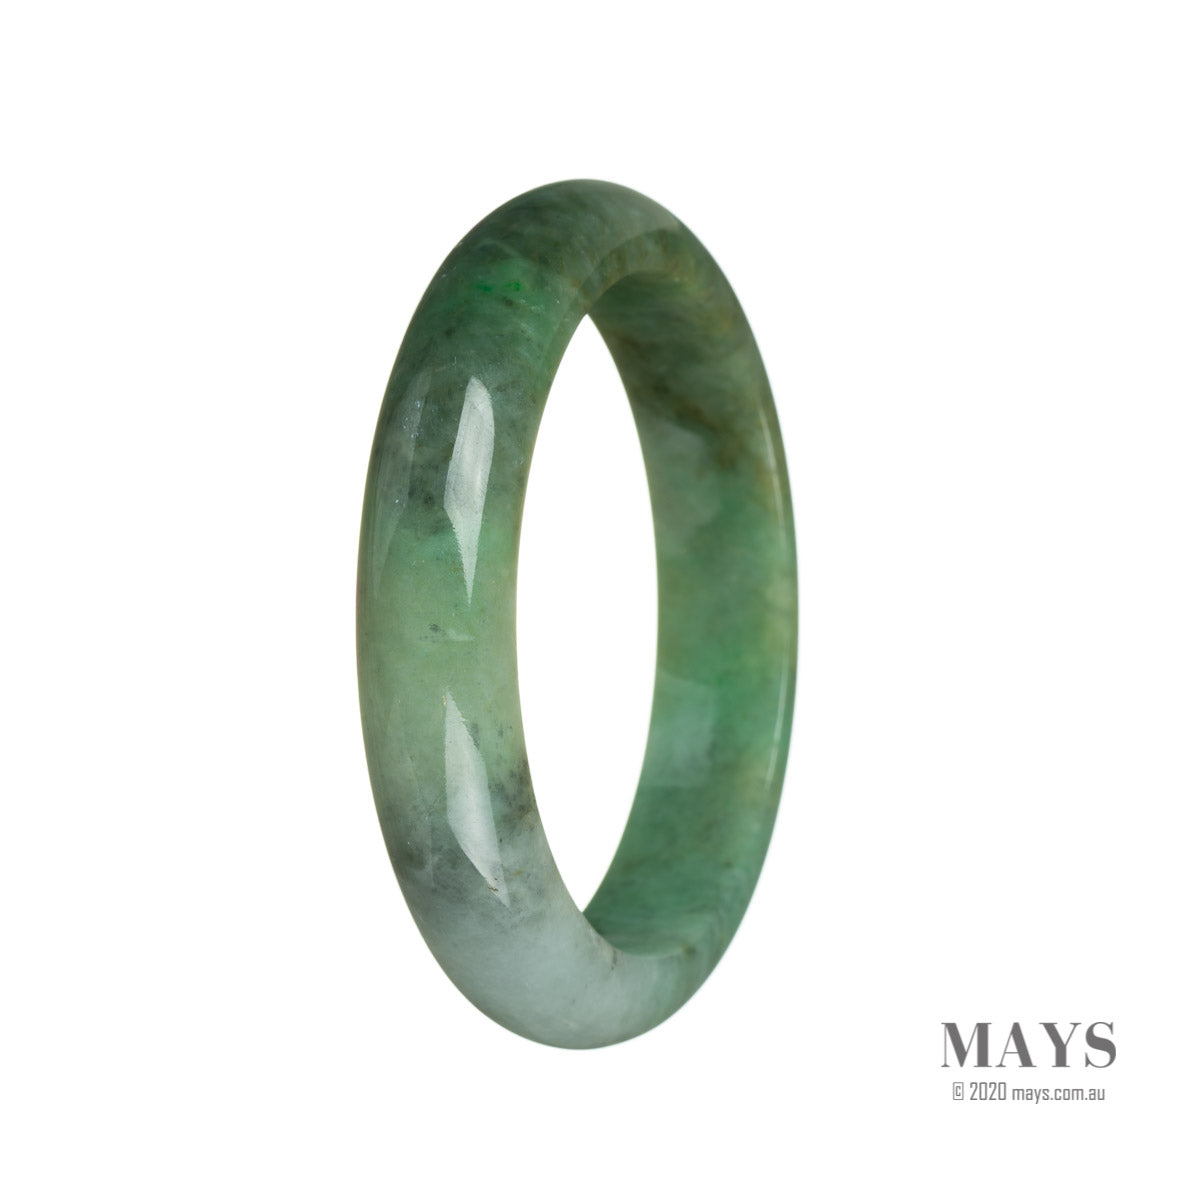 A beautiful green jade bangle bracelet with a certified Grade A quality. The bracelet features a unique half moon pattern and has a diameter of 60mm. Perfect for adding a touch of elegance and charm to any outfit.